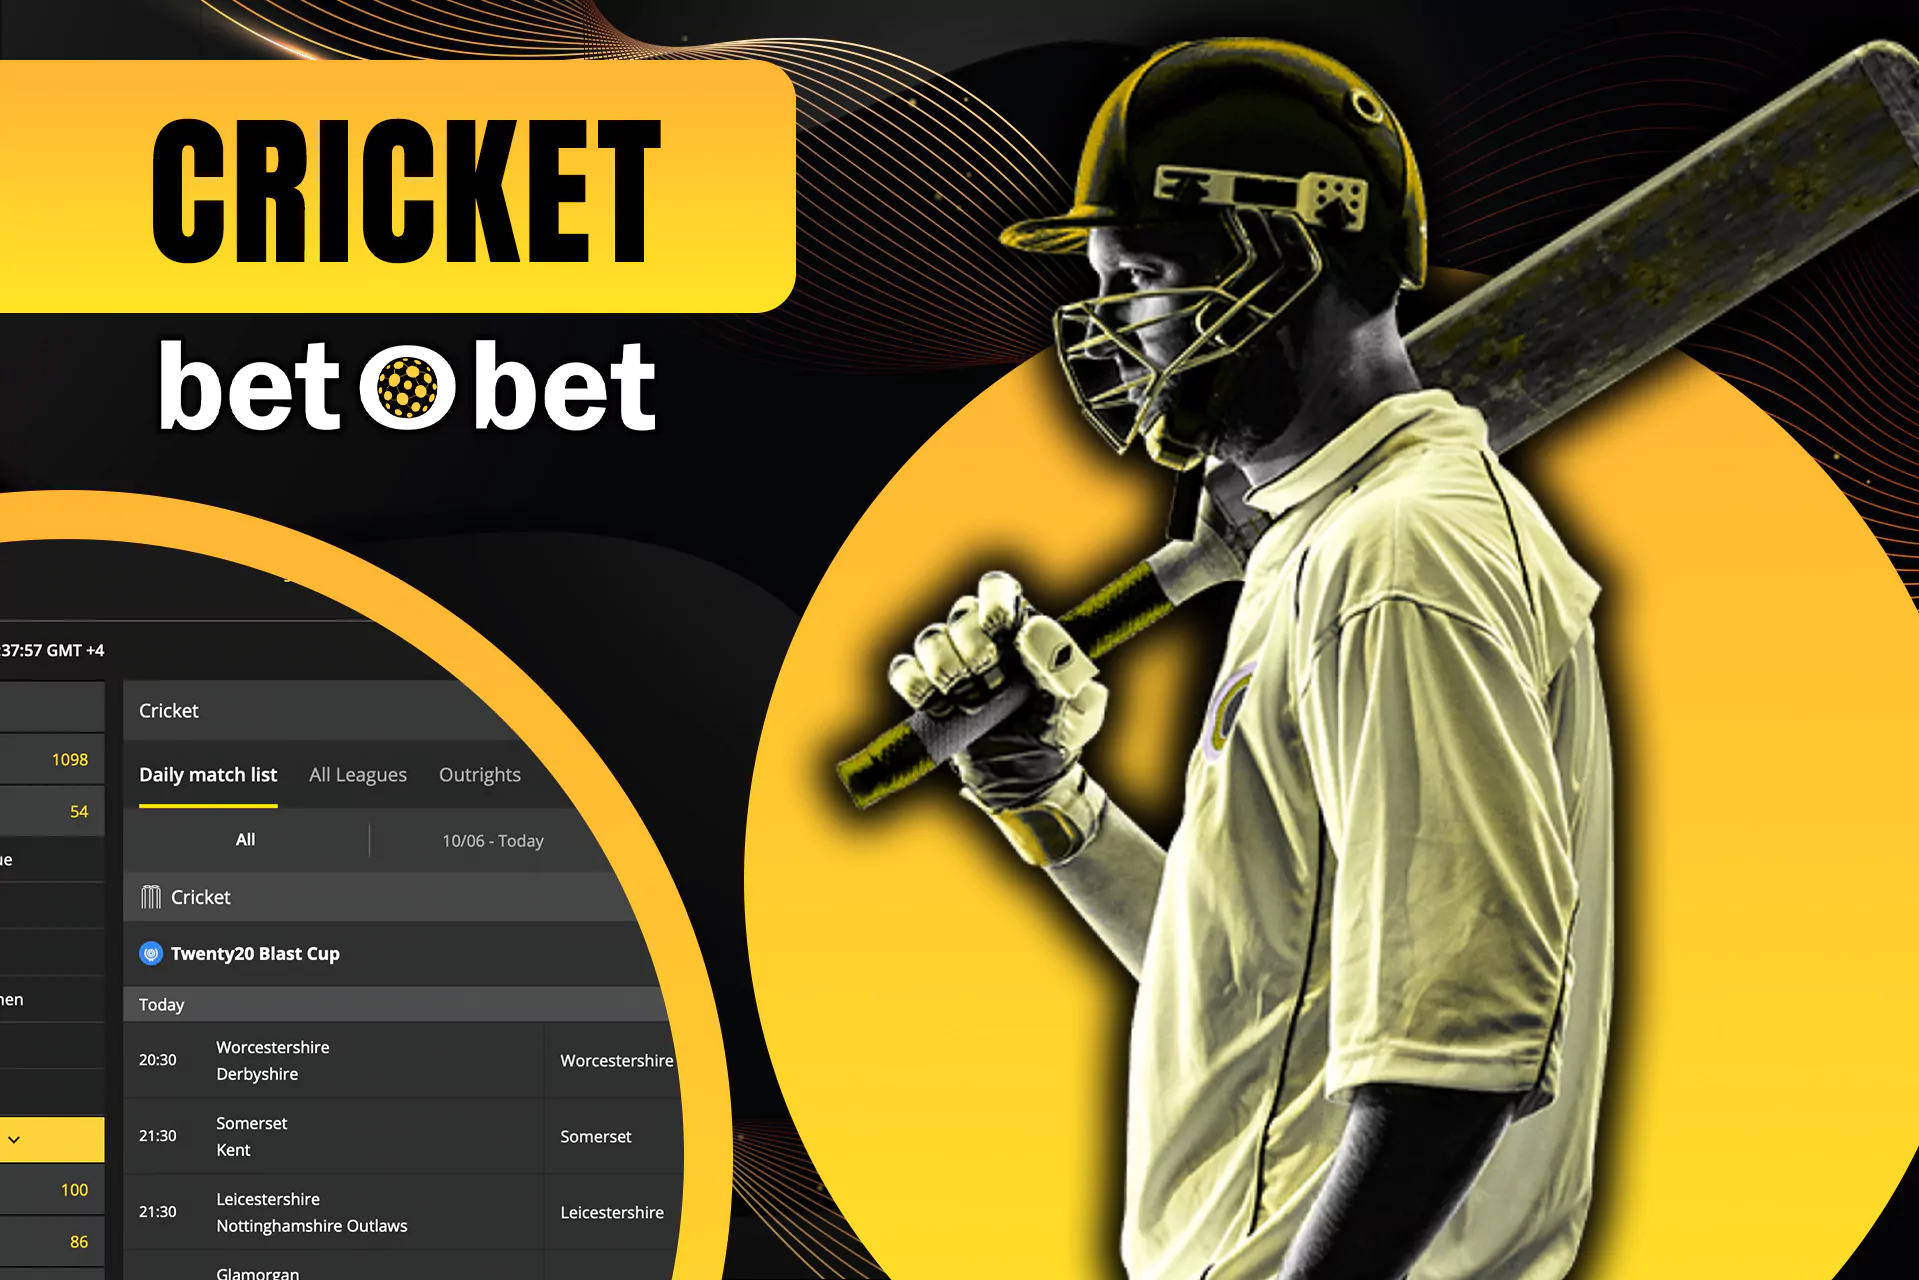 Place bets on cricket and cricket players at Bet O Bet.